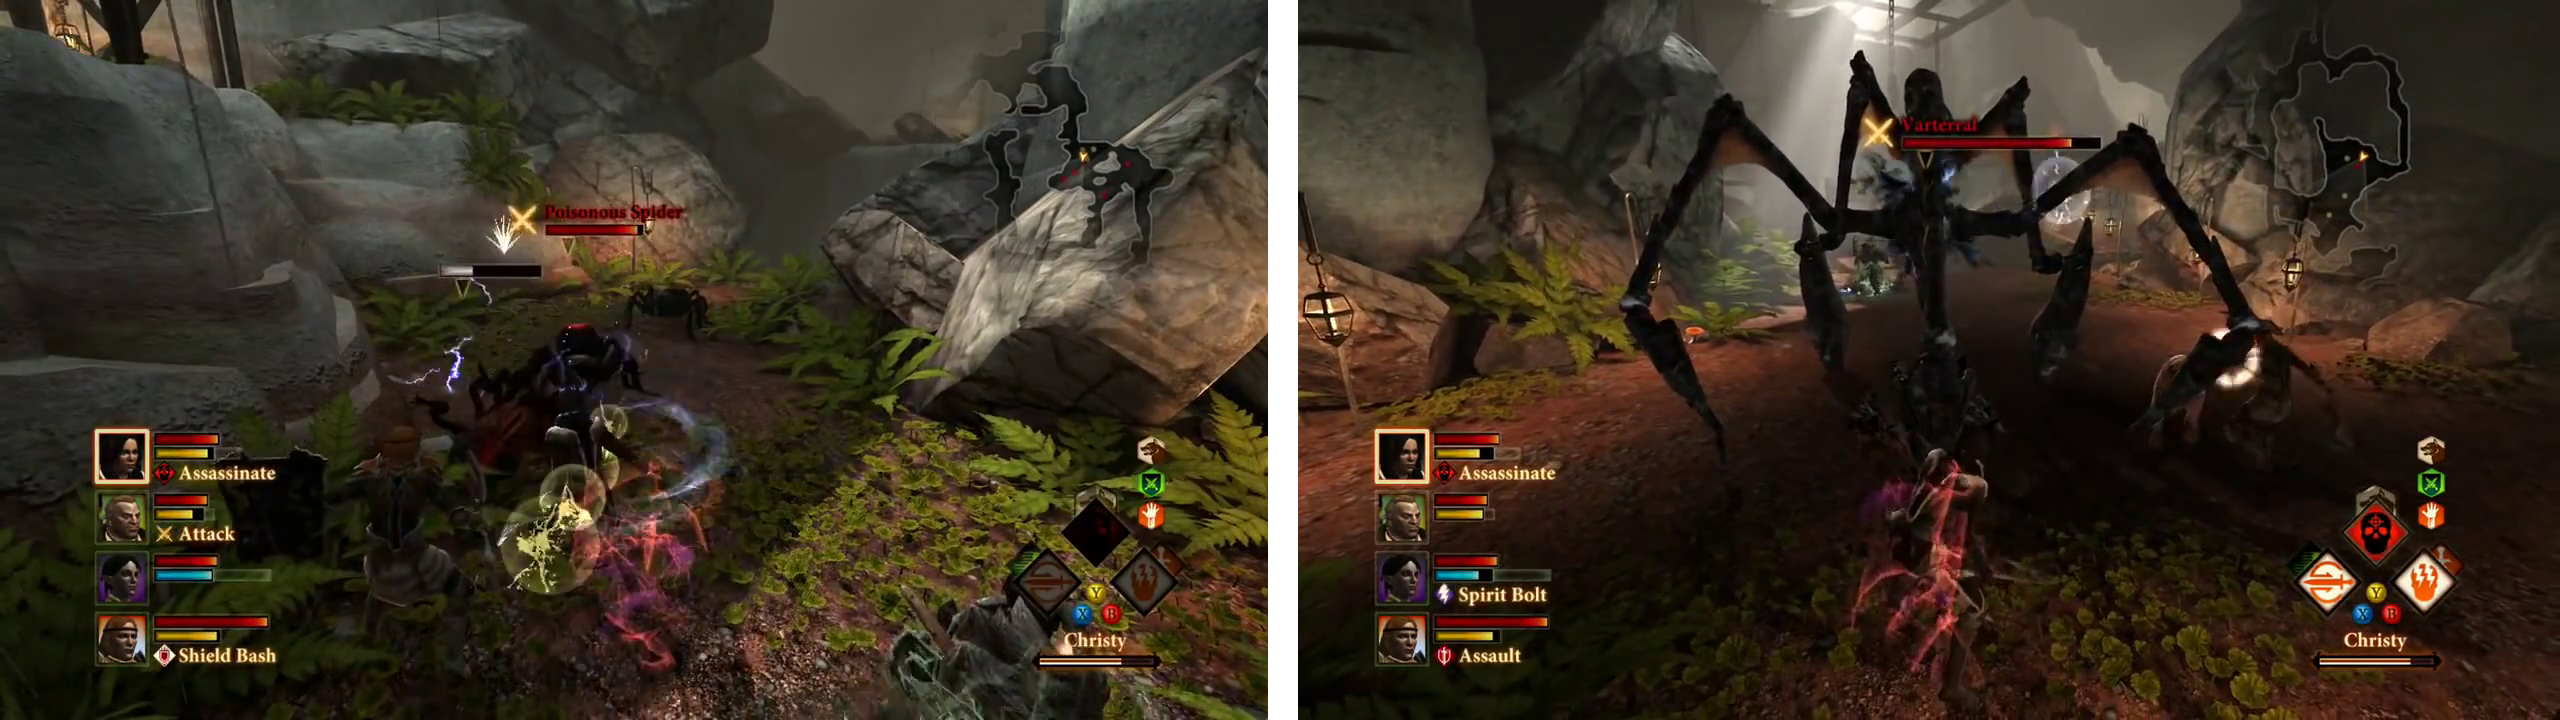 Move through the Mountain Cave, killing enemies as you go (left). Eventually you will encounter another varterral (right).